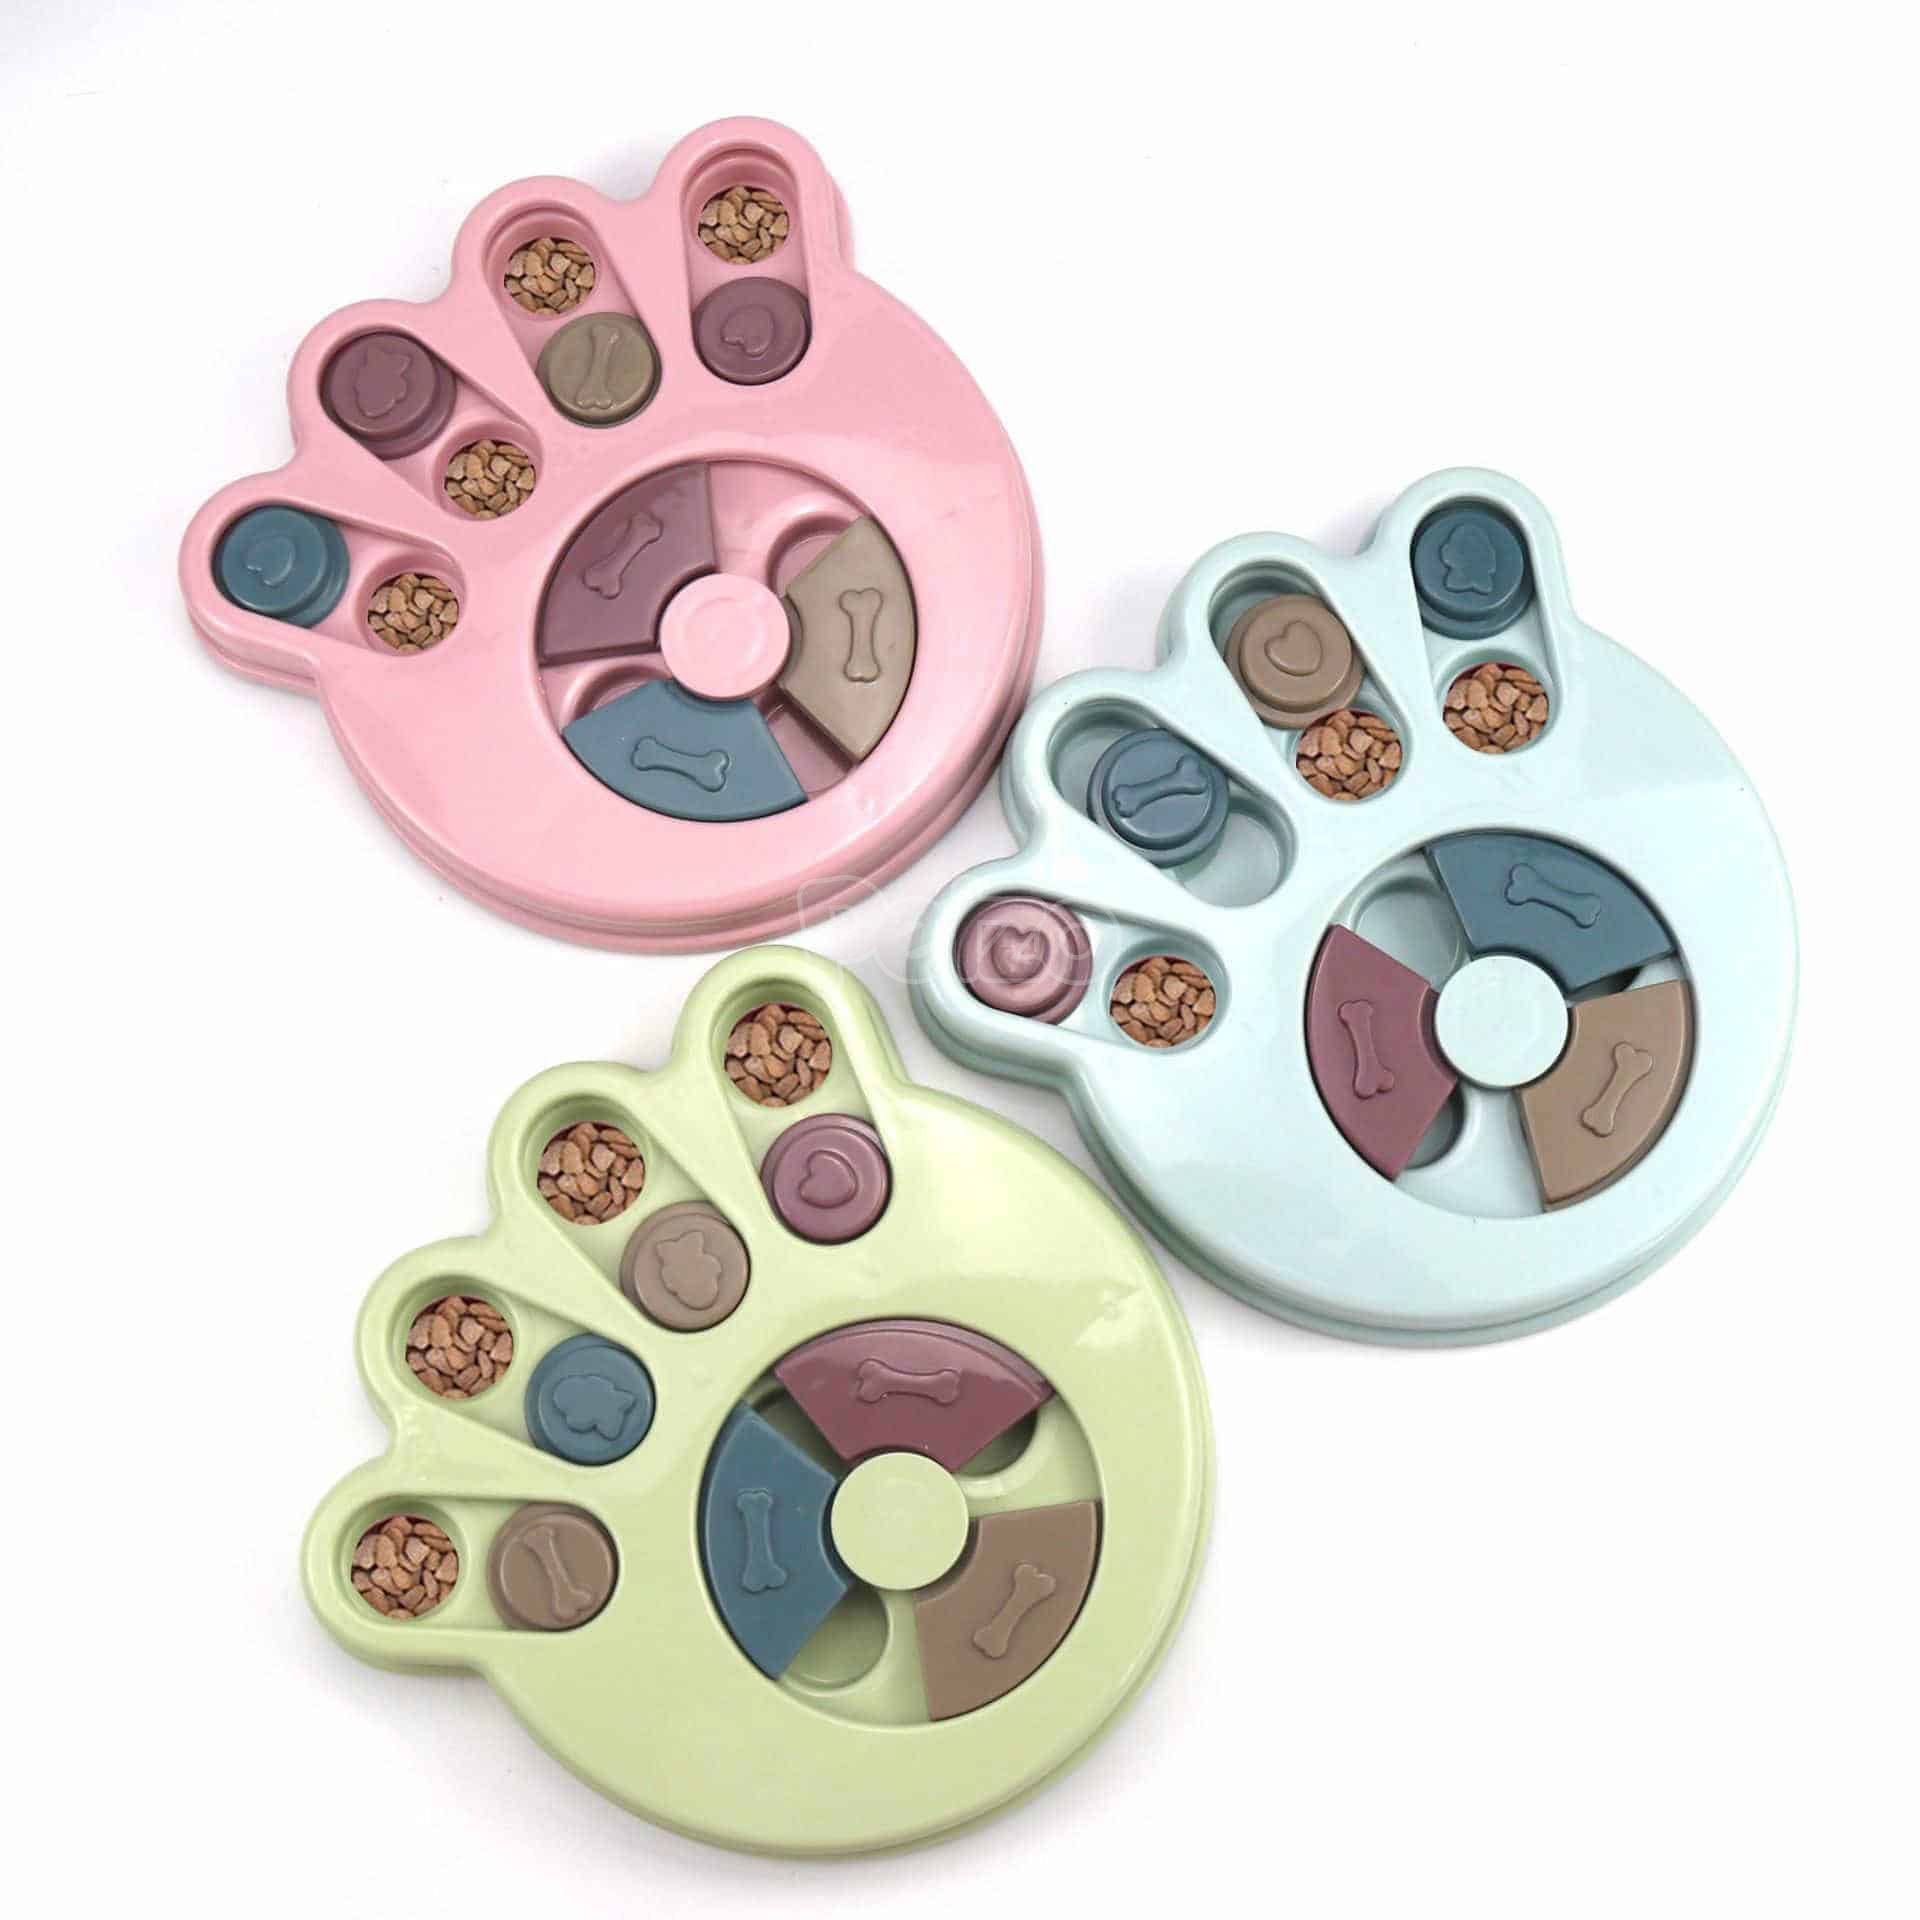 https://www.petzo.net/wp-content/uploads/2020/12/Pet-Puzzle-Toys-Increase-IQ-Interactive-Slow-Dispensing-Feeding-Pet-Dog-Training-Games-Feeder-For-Small.jpg_q50.jpg